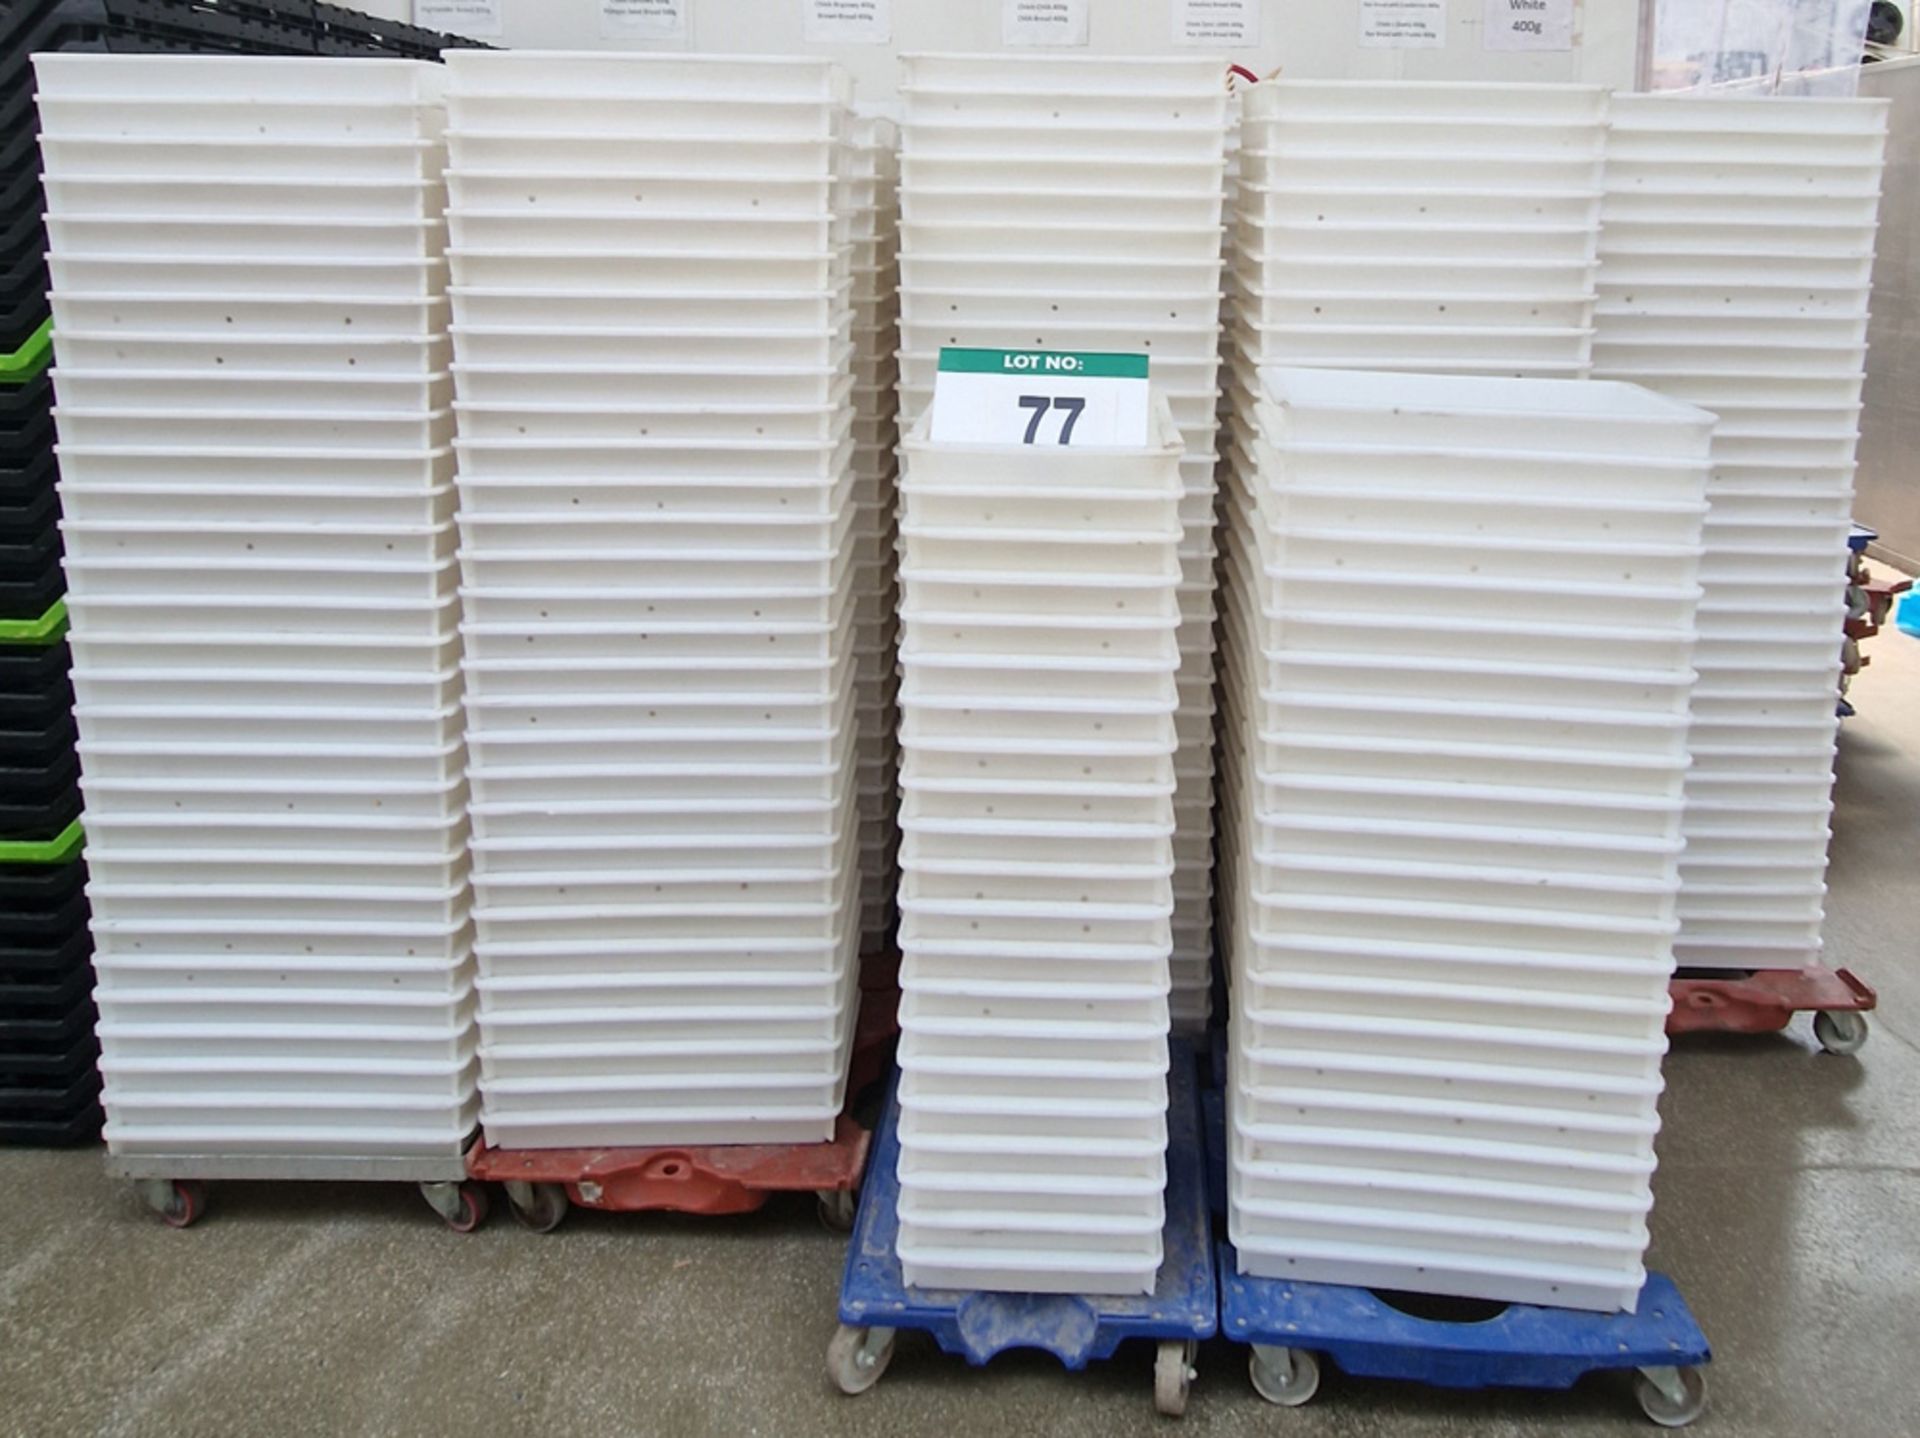 Seven Hundred and Fifty Four White Plastic Bread Trays, each approx. 330mm x 540mm x 10mm tall